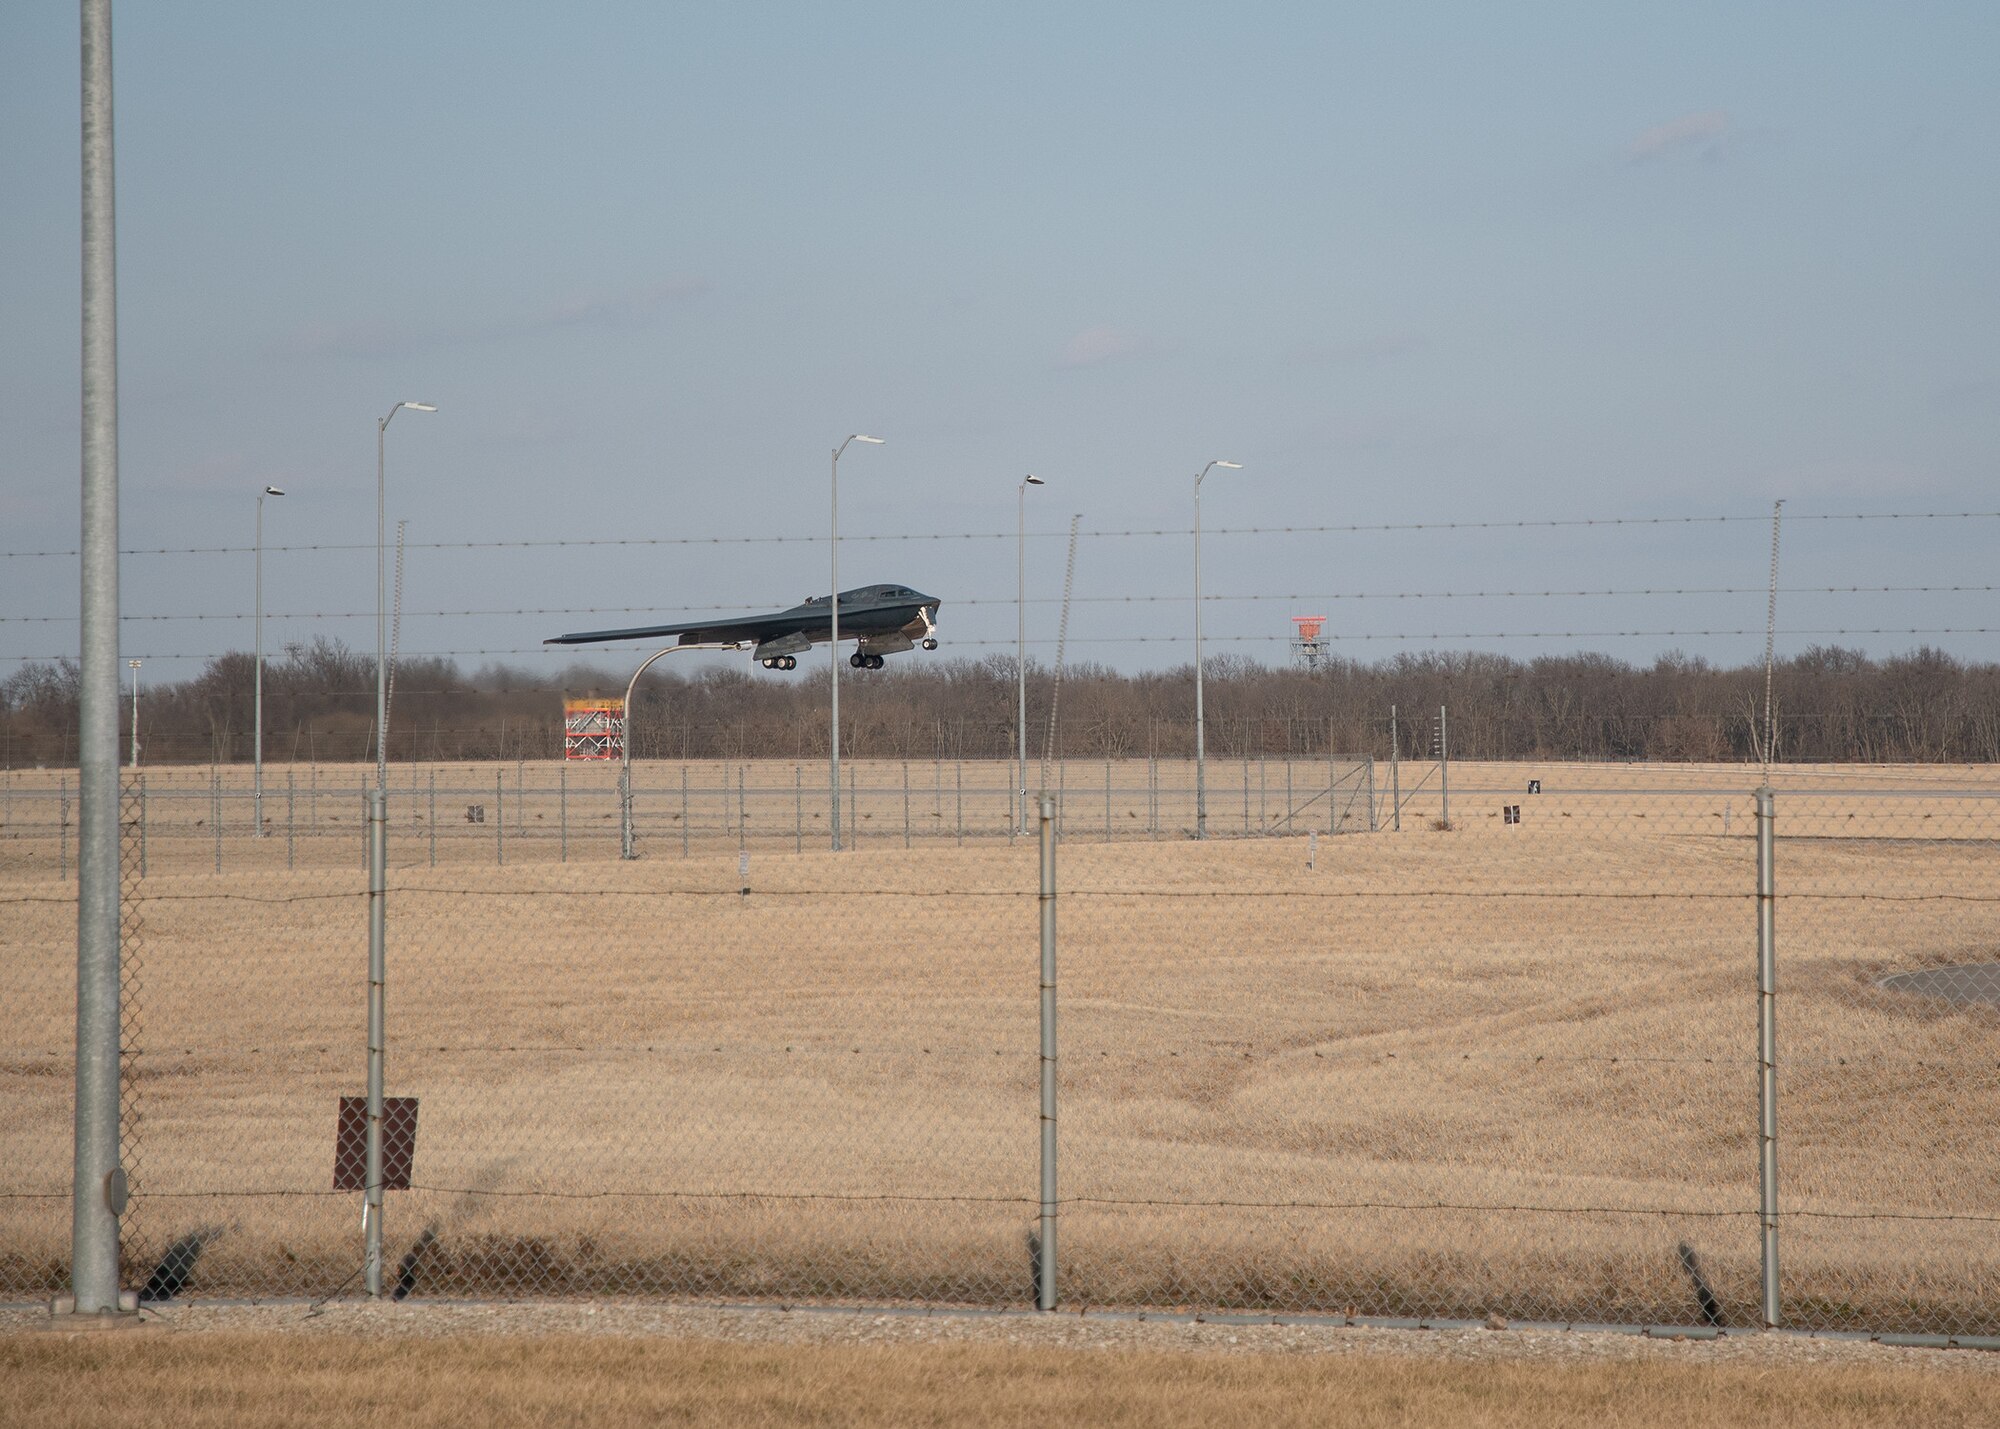 A B-2 Spirit stealth bomber takes off from the runway at Whiteman Air Force Base, Missouri, March 6, 2021.